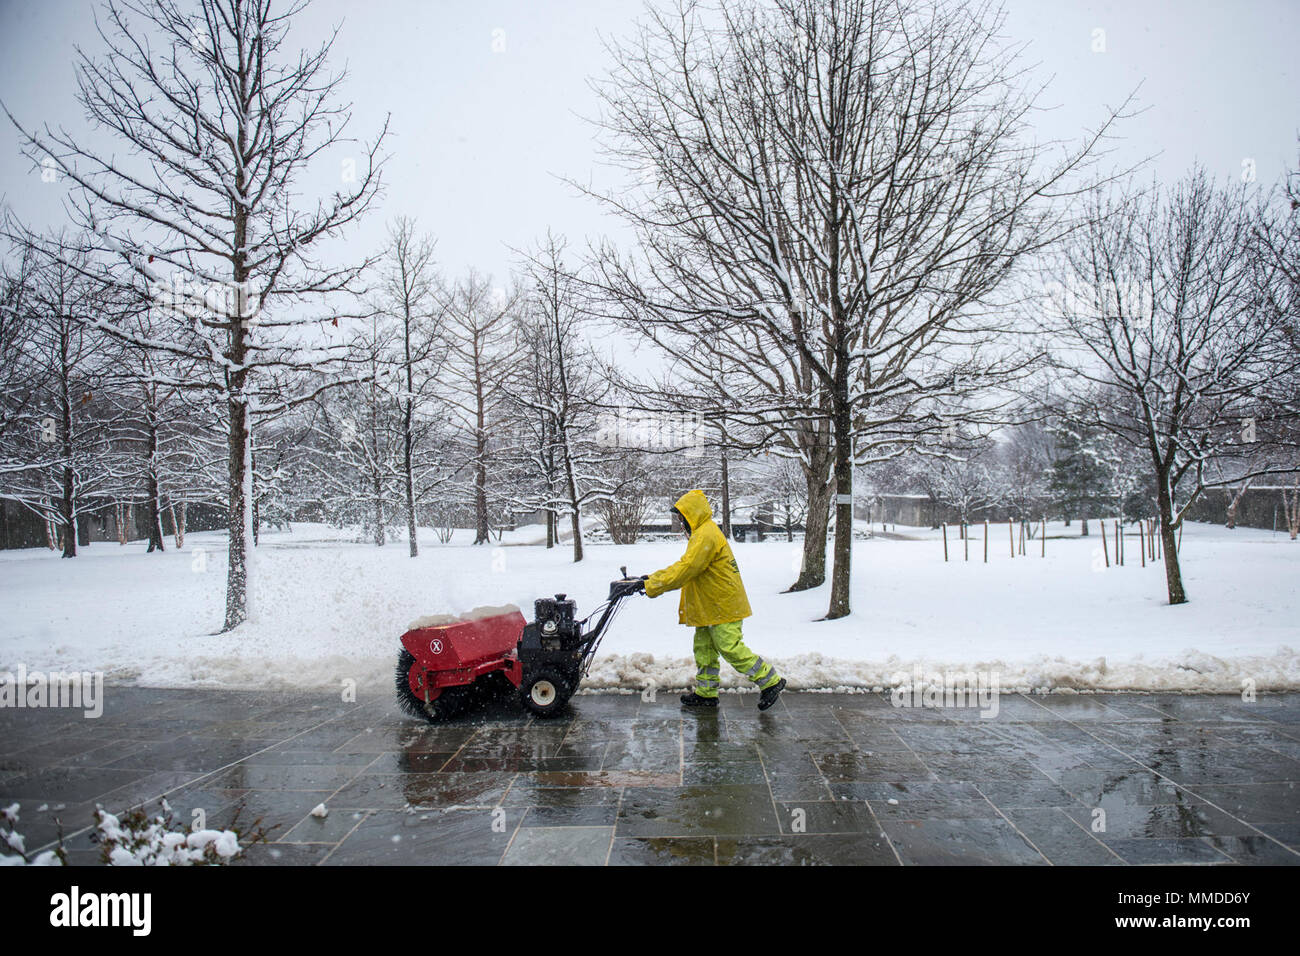 Snow is removed by a contract worker in the center of the Columbarium Court of Arlington National Cemetery, Arlington, Virginia, March 21, 2018. This was the second day of spring when a snow storm hit the national capital region. (U.S. Army Stock Photo